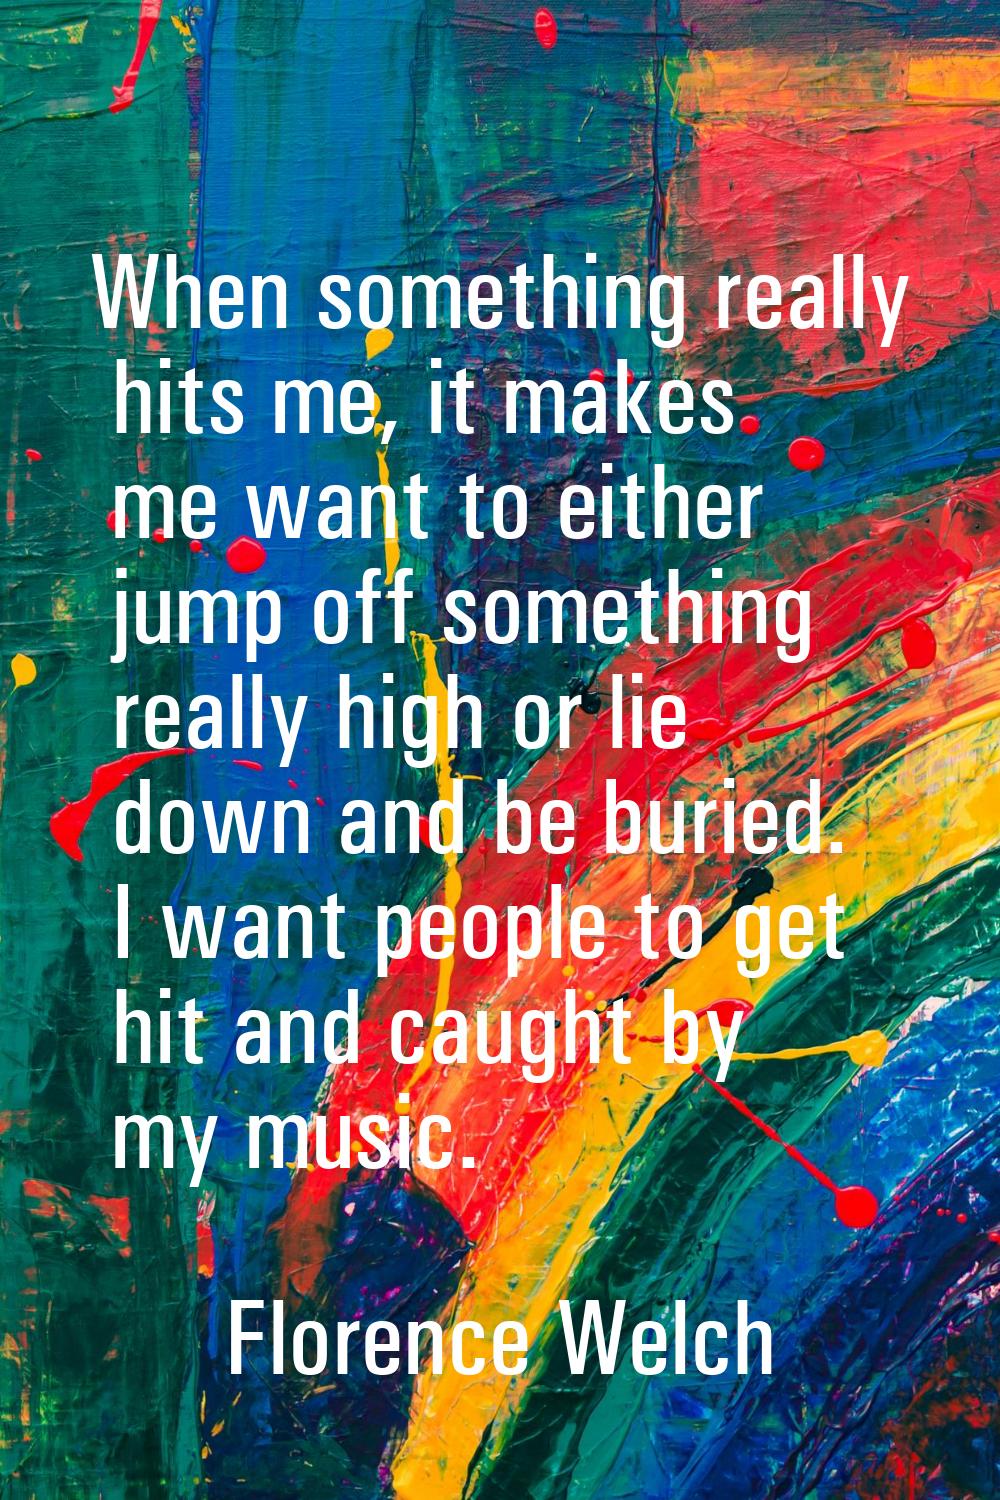 When something really hits me, it makes me want to either jump off something really high or lie dow